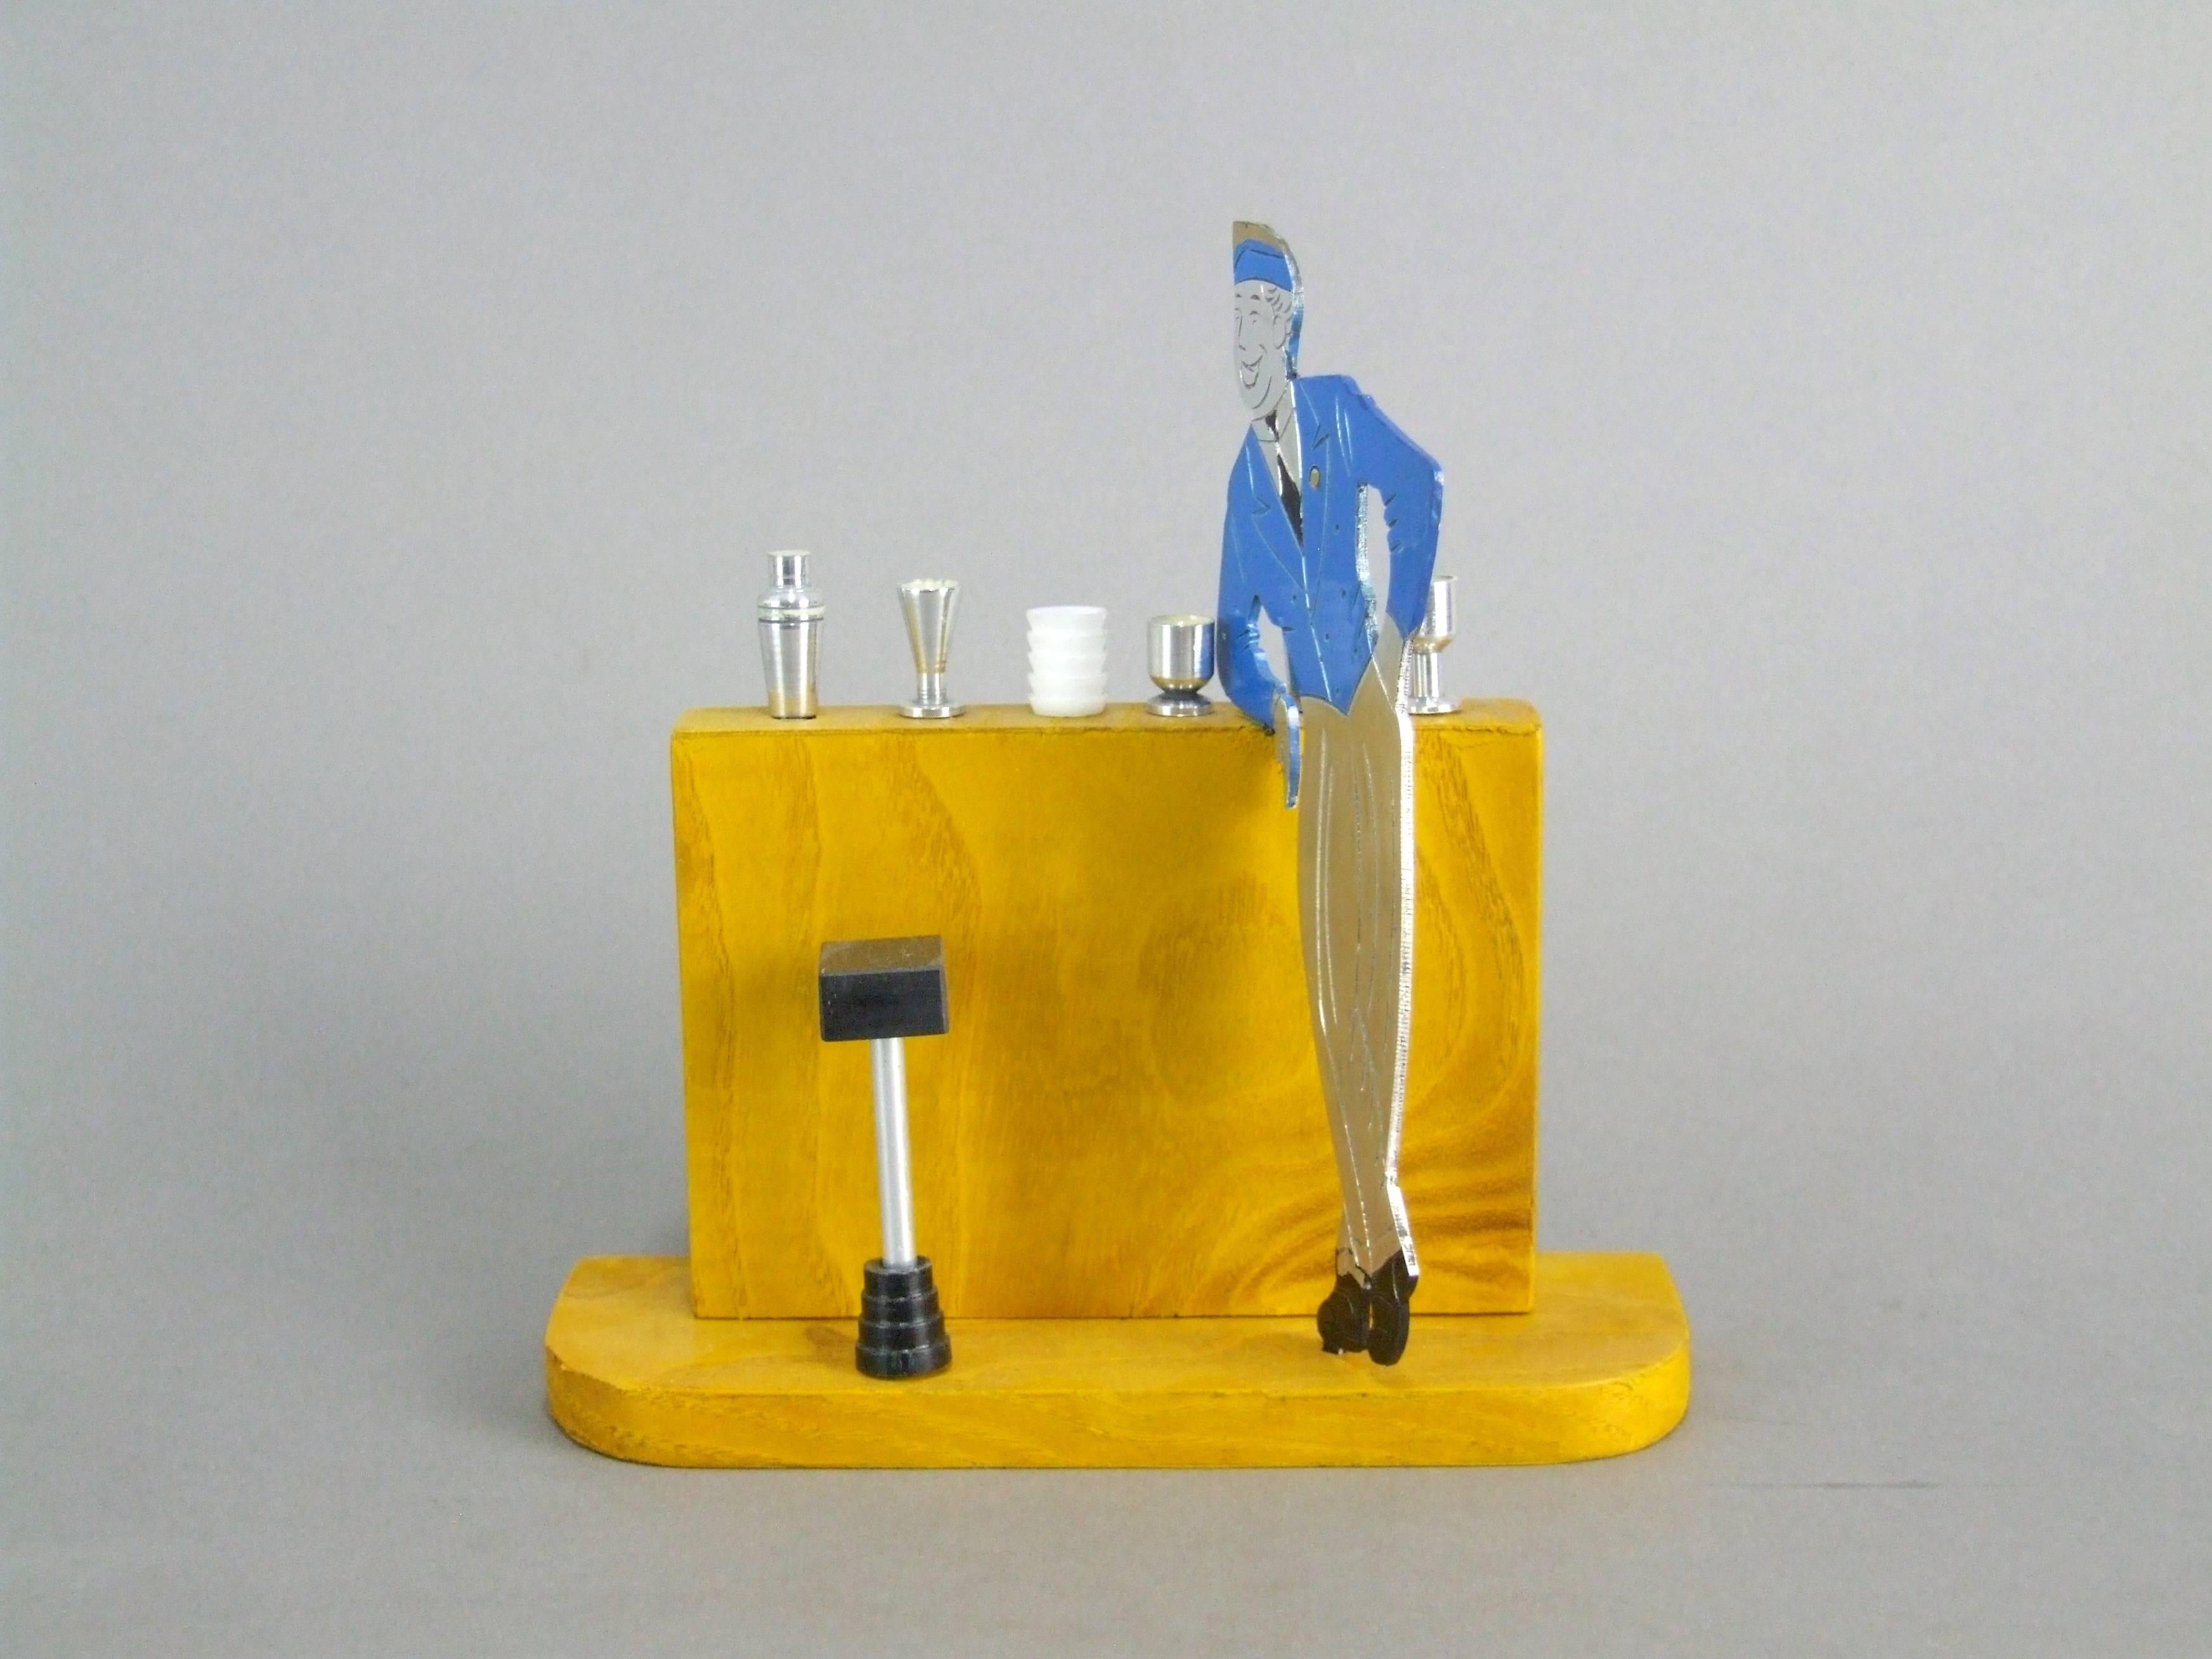 Two dimensional airman standing at a bar. The items on the bar are pullout cocktail sticks. The base is wooden and measures 5.5 inches long by 2 inches deep and the total height is 5.75 inches (14cm x 5cm x 14.5cm). The set is French and an unsigned